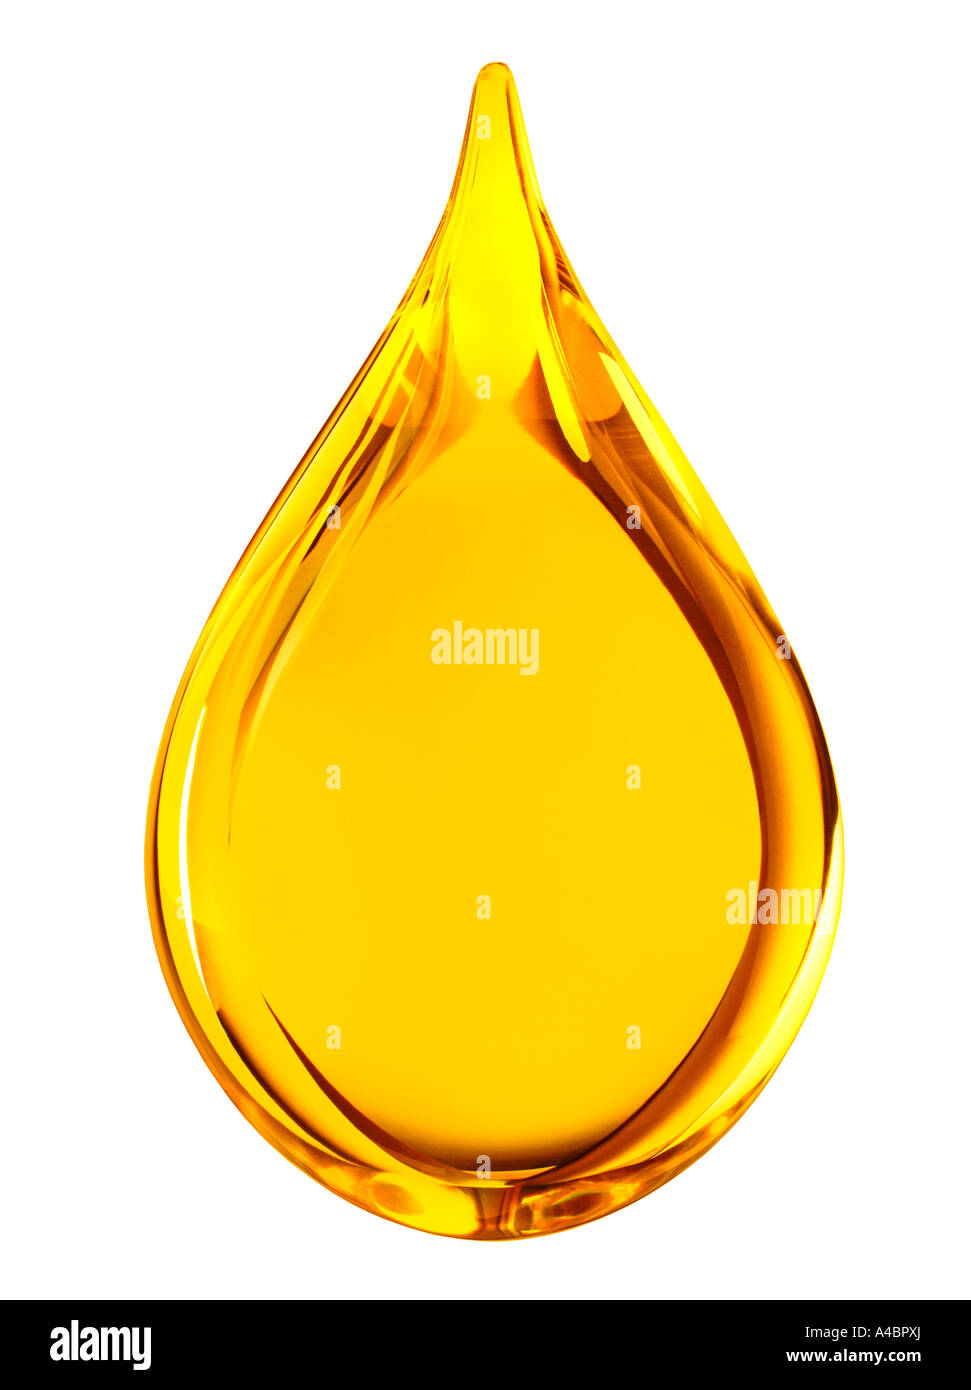 Droplet of oil / fuel. Picture by Paddy McGuinness paddymcguinness Stock Photo